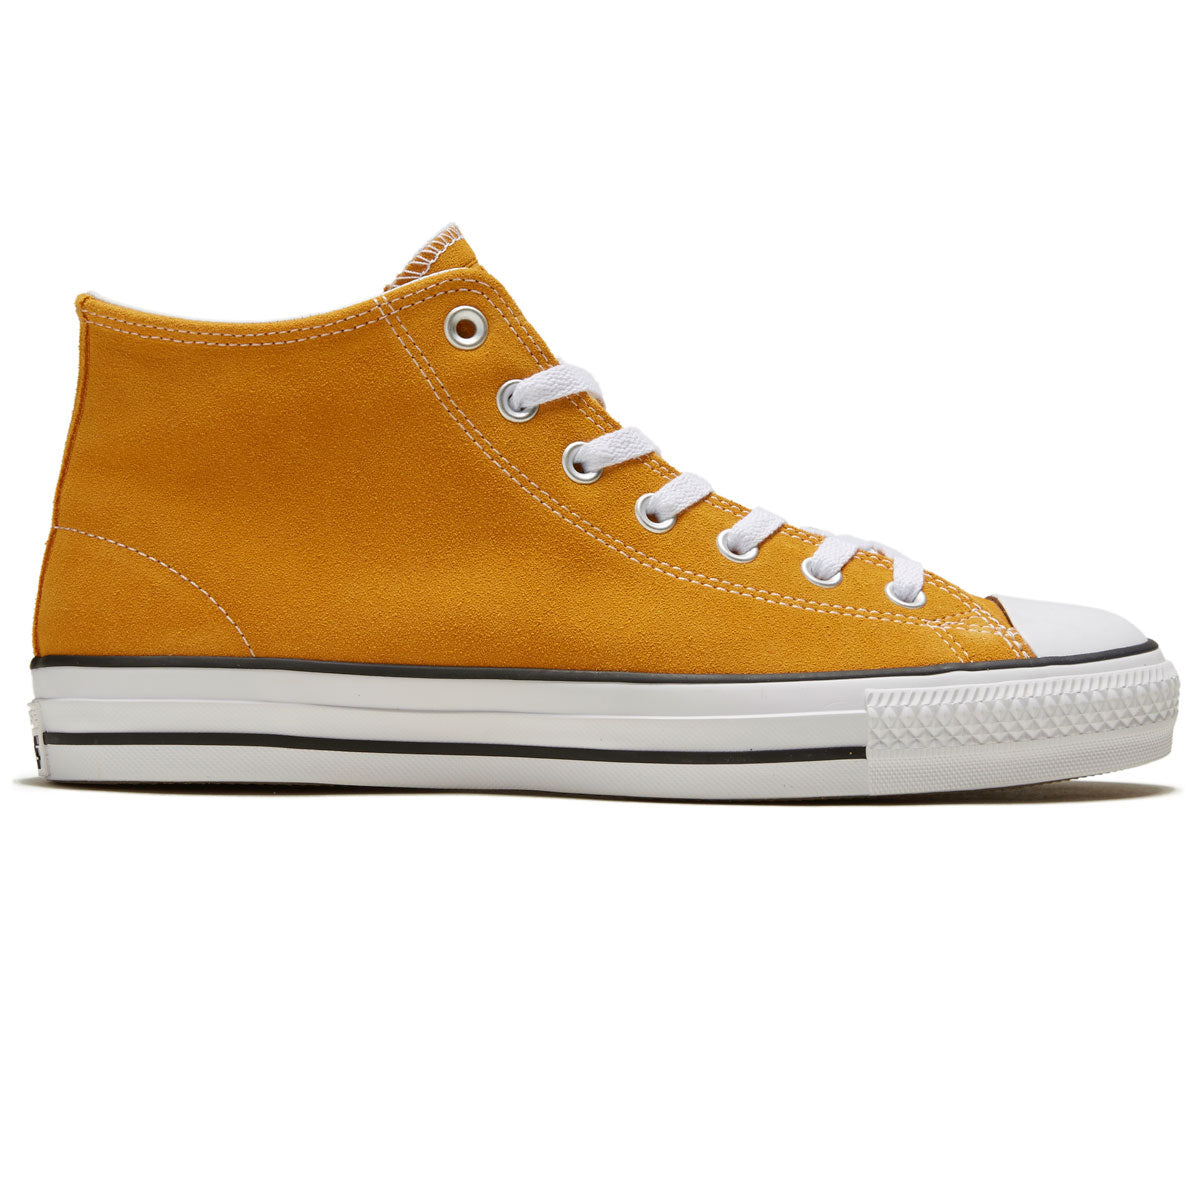 Converse Chuck Taylor All Star Pro Mid Shoes - Sunflower Gold/White/Black image 1